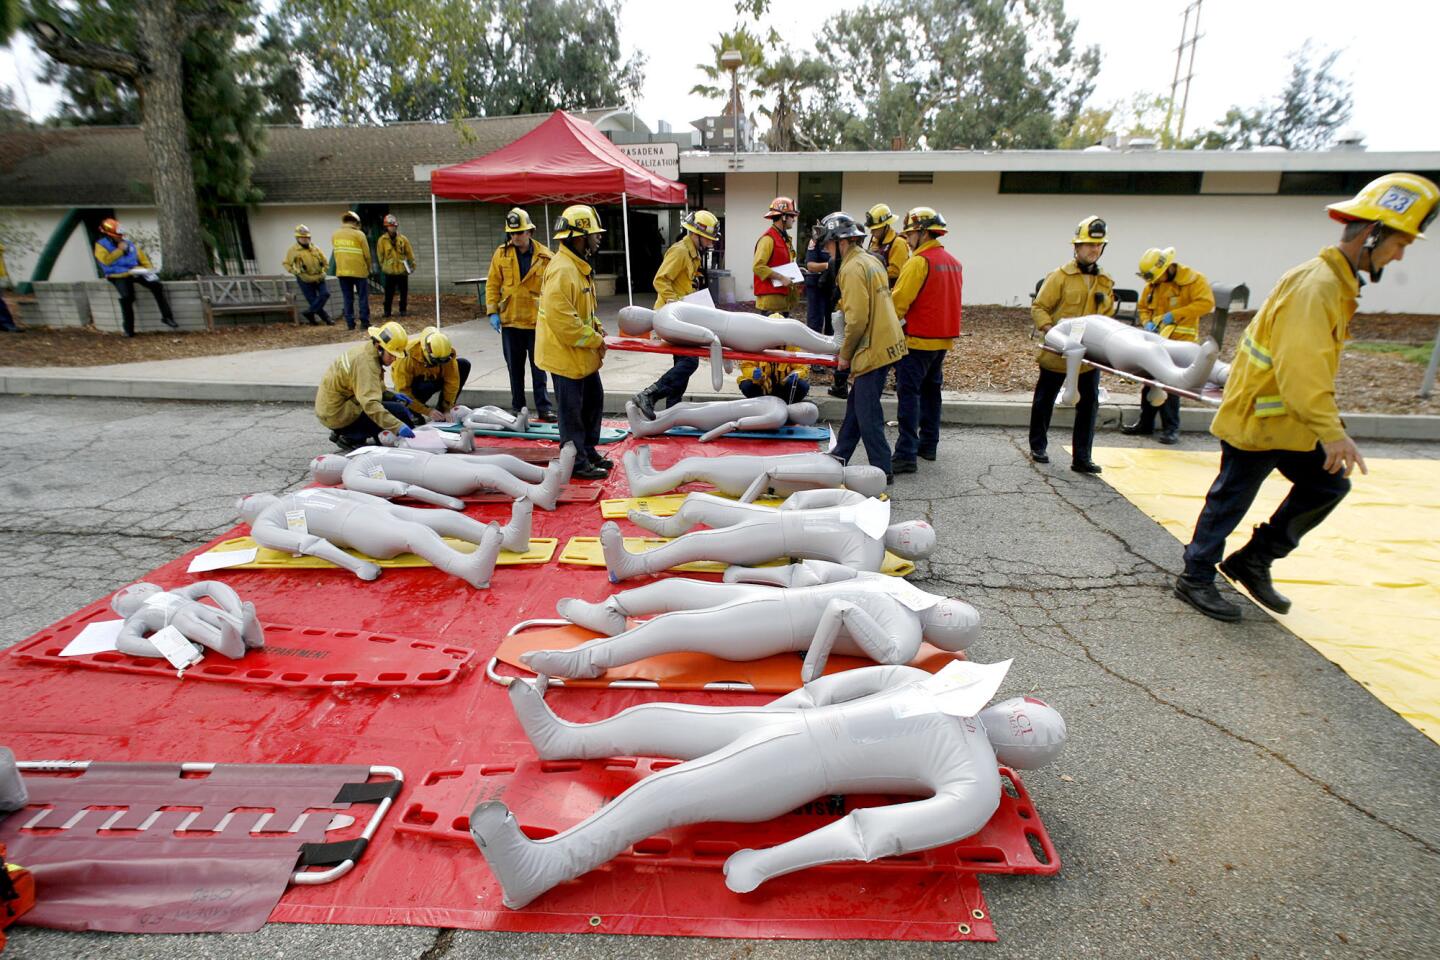 The Pasadena Fire Dept. held a Mass Casualty Incident Drill to help train area fire depts. at the Pasadena Civil Defense Center in Pasadena on Friday, Nov. 9, 2012. The Glendale Fire Dept. along with Alhambra, So. Pasadena and Pasadena took part in the drill.